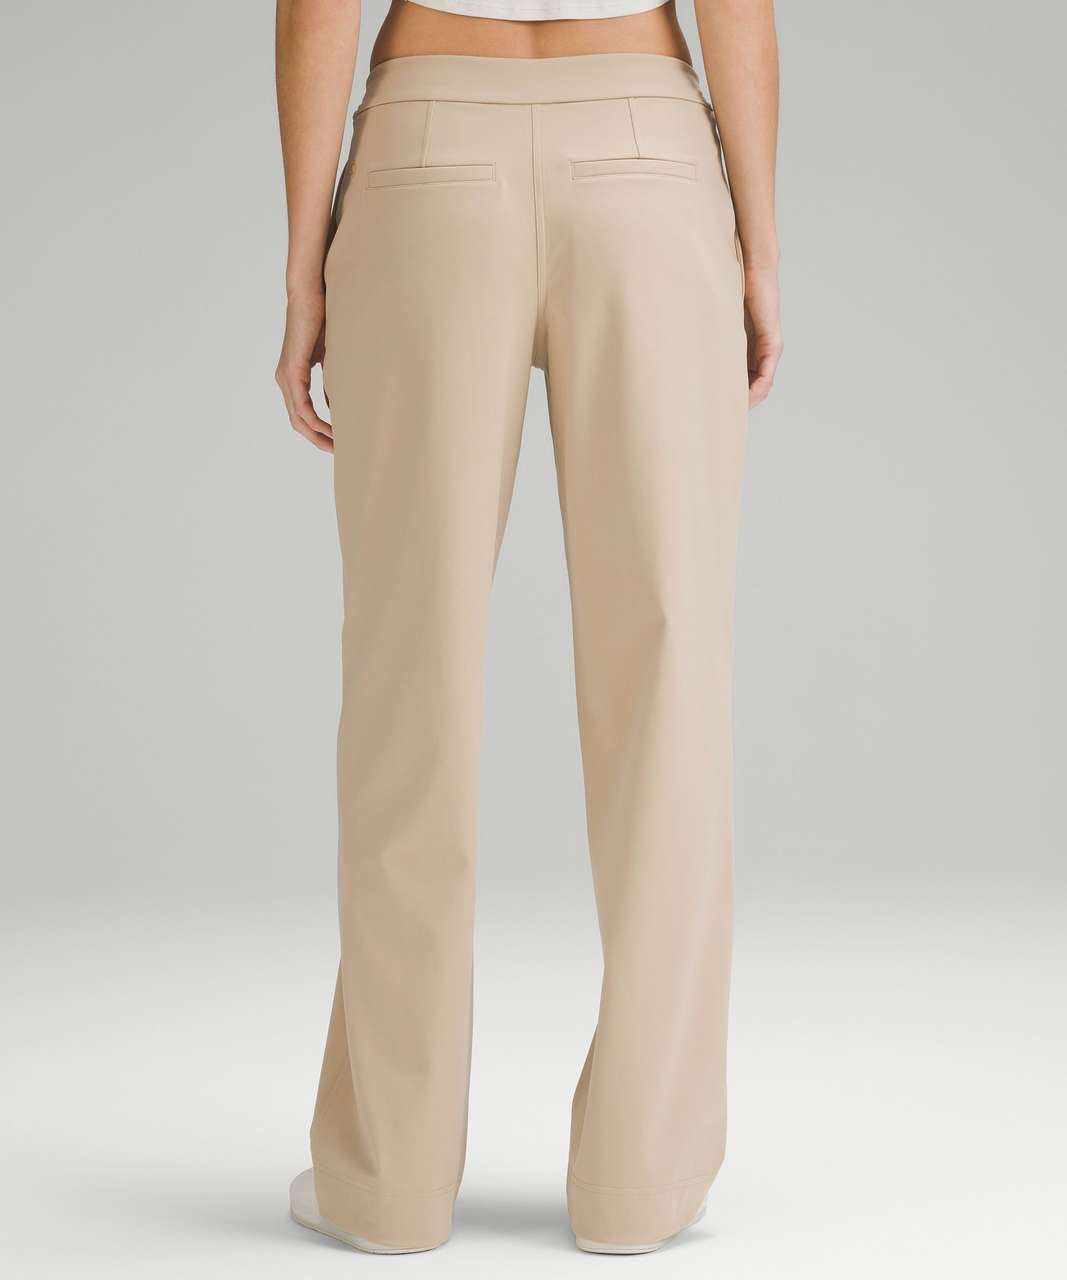 Lululemon Luxtreme Mid-Rise Straight-Leg Trouser - Trench